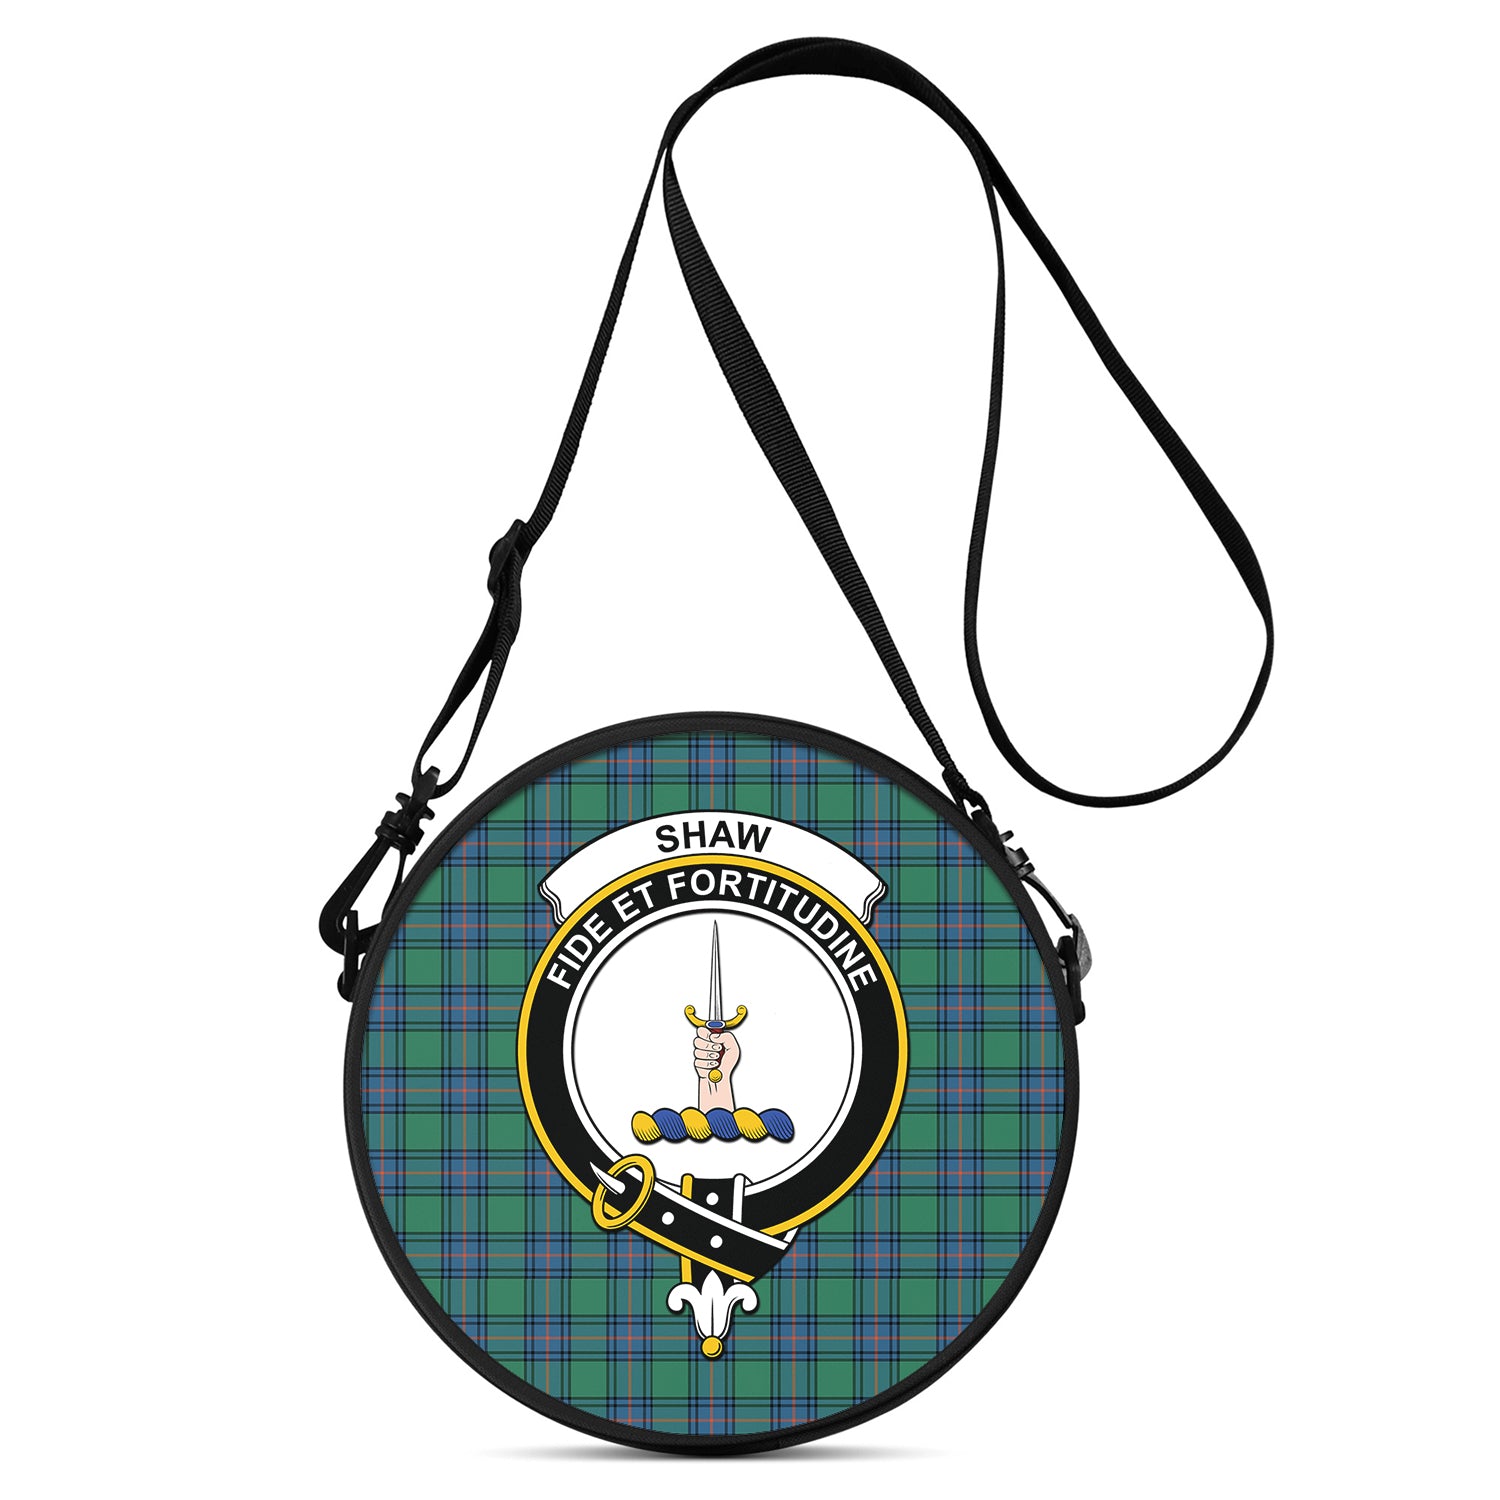 shaw-ancient-tartan-round-satchel-bags-with-family-crest